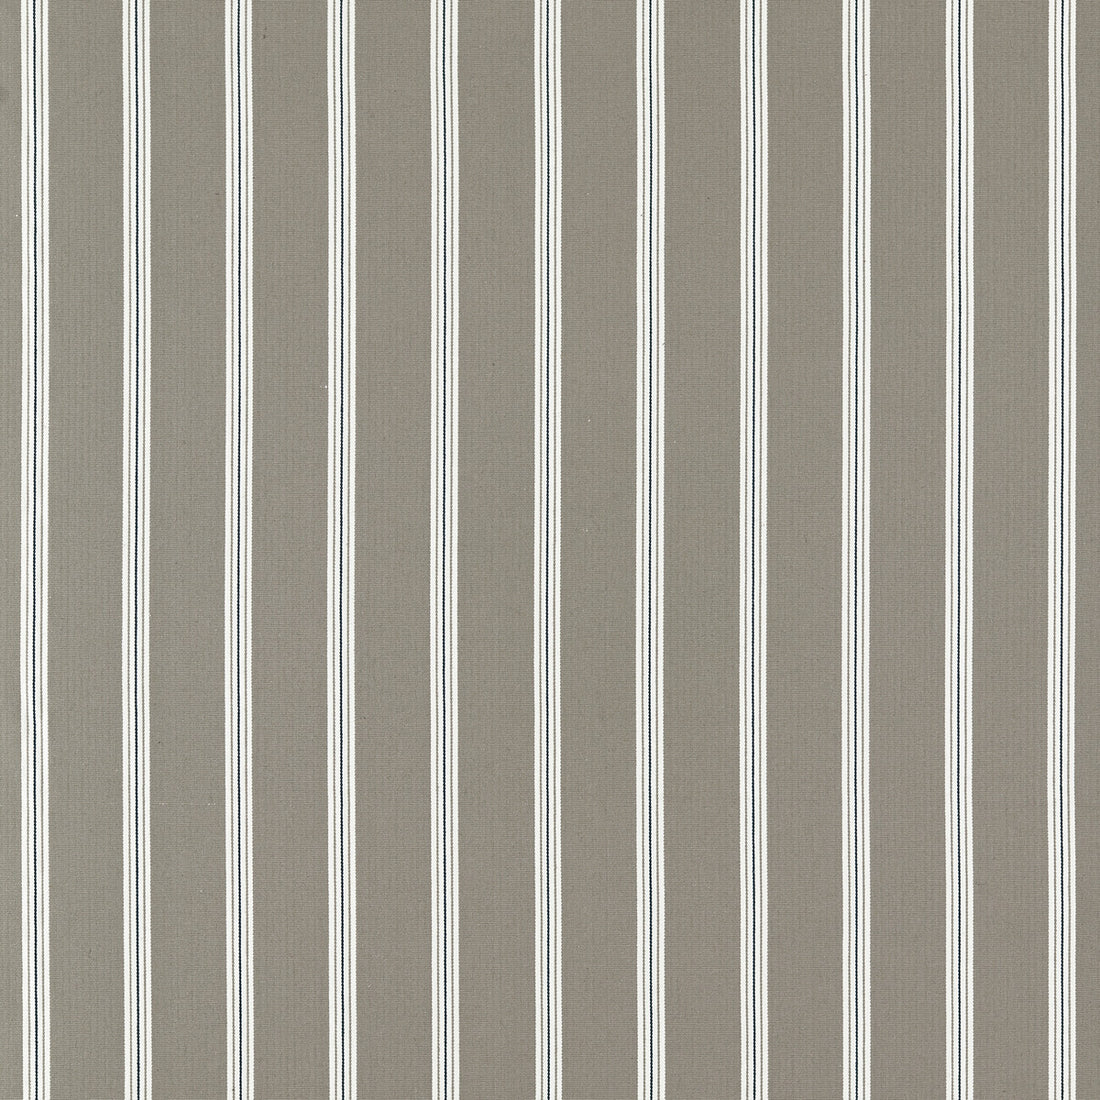 Knightsbridge fabric in charcoal/linen color - pattern F1500/02.CAC.0 - by Clarke And Clarke in the Clarke &amp; Clarke Edgeworth collection